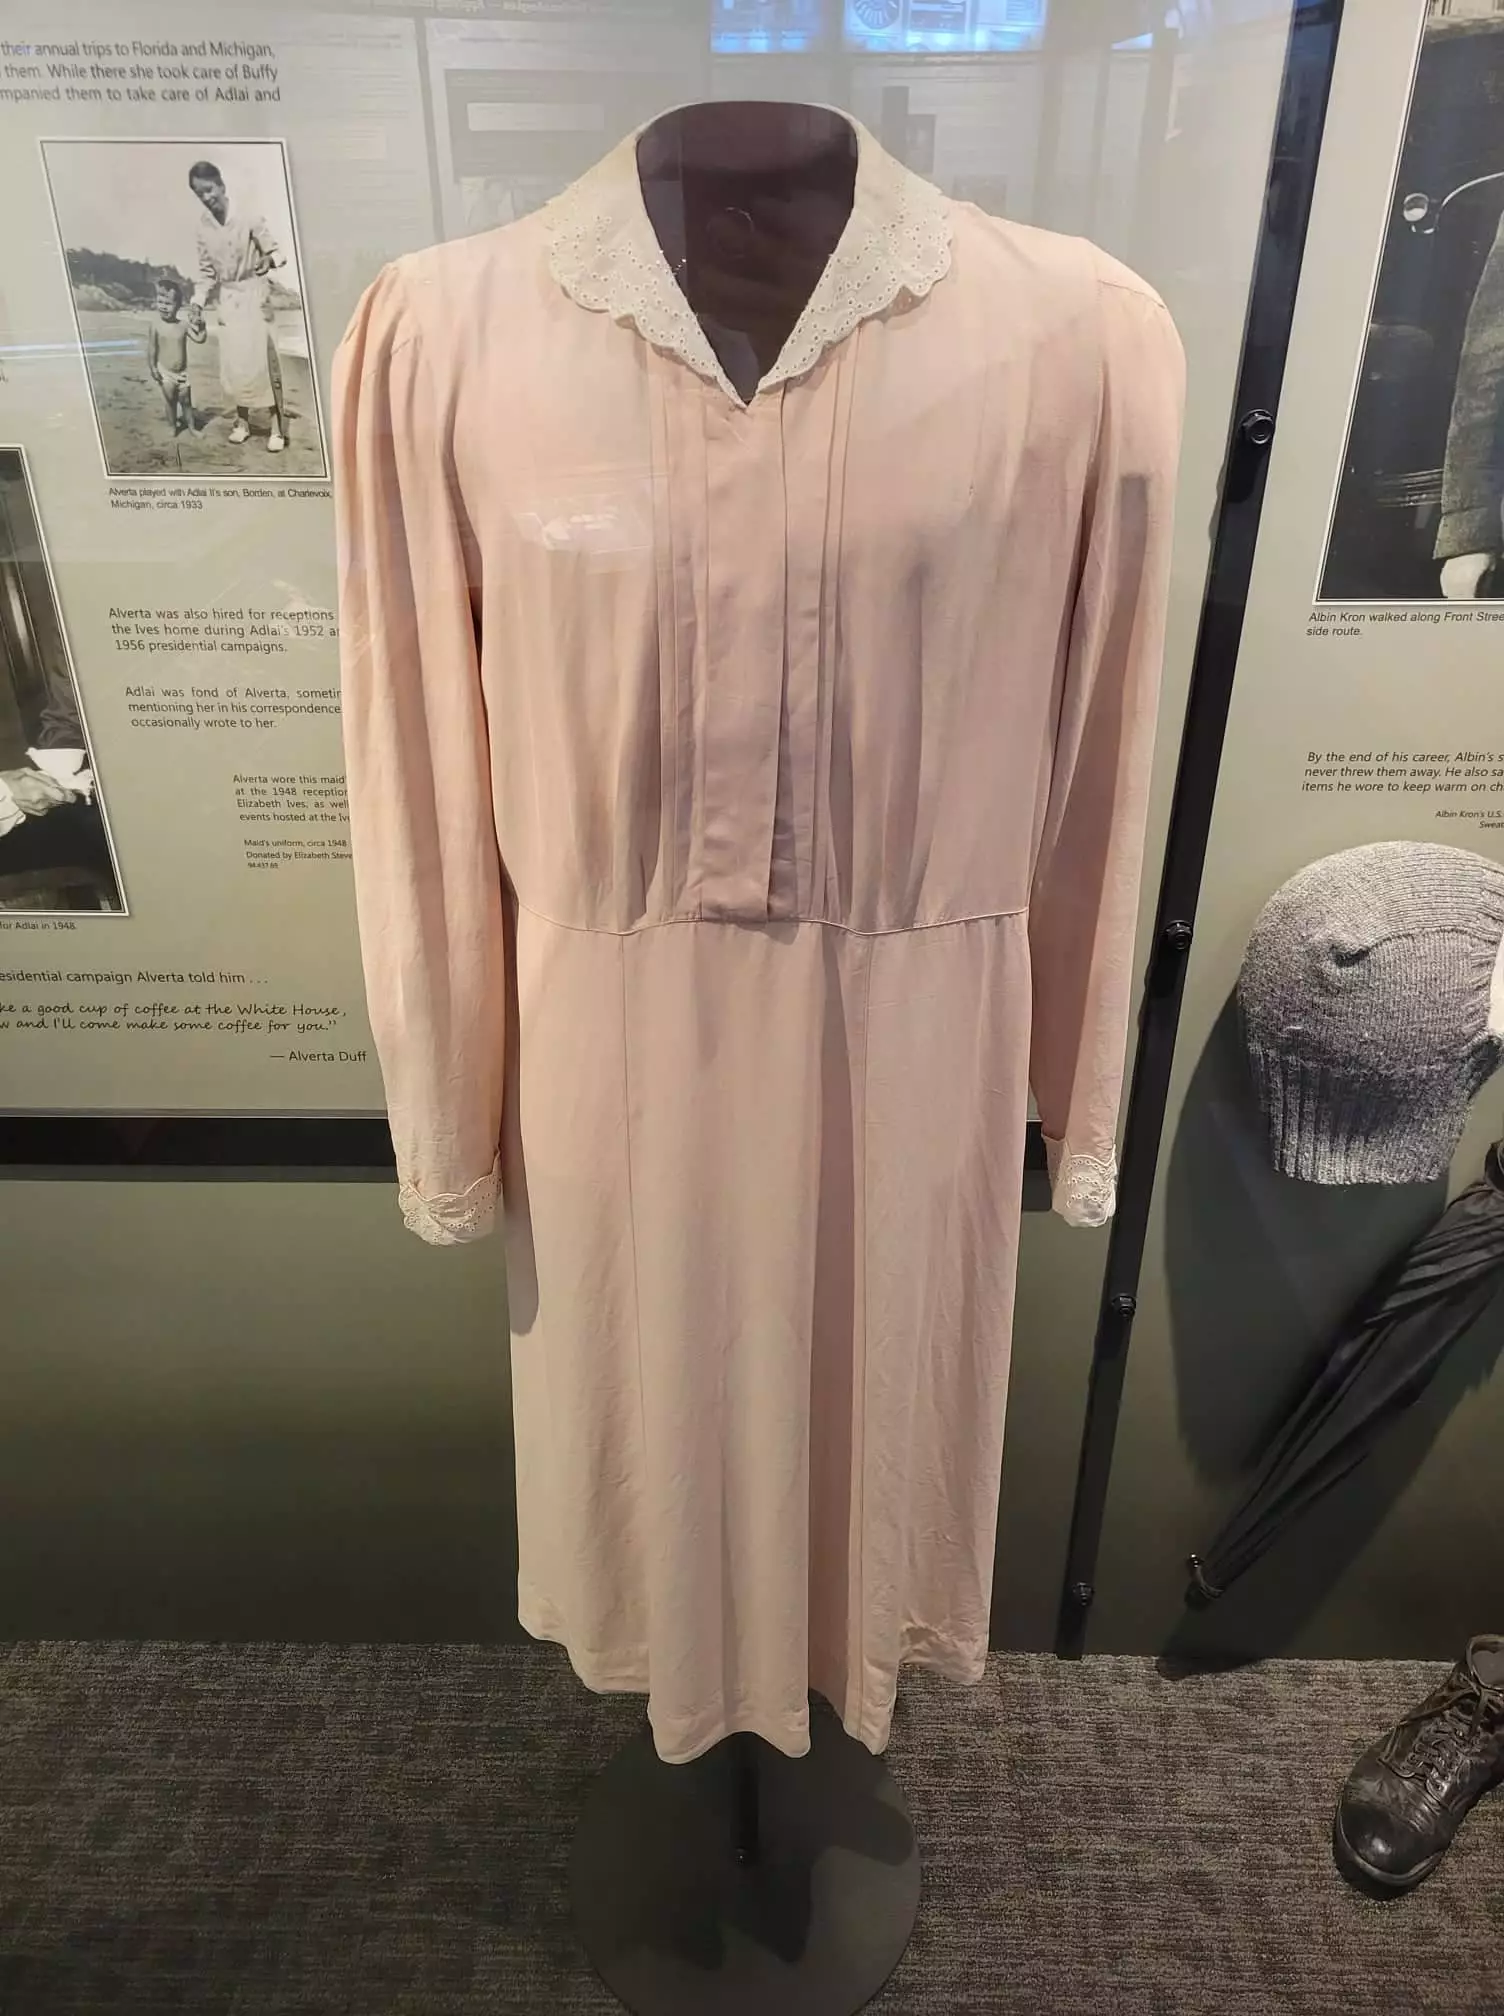 a long-sleeved light pink dress with white collar.